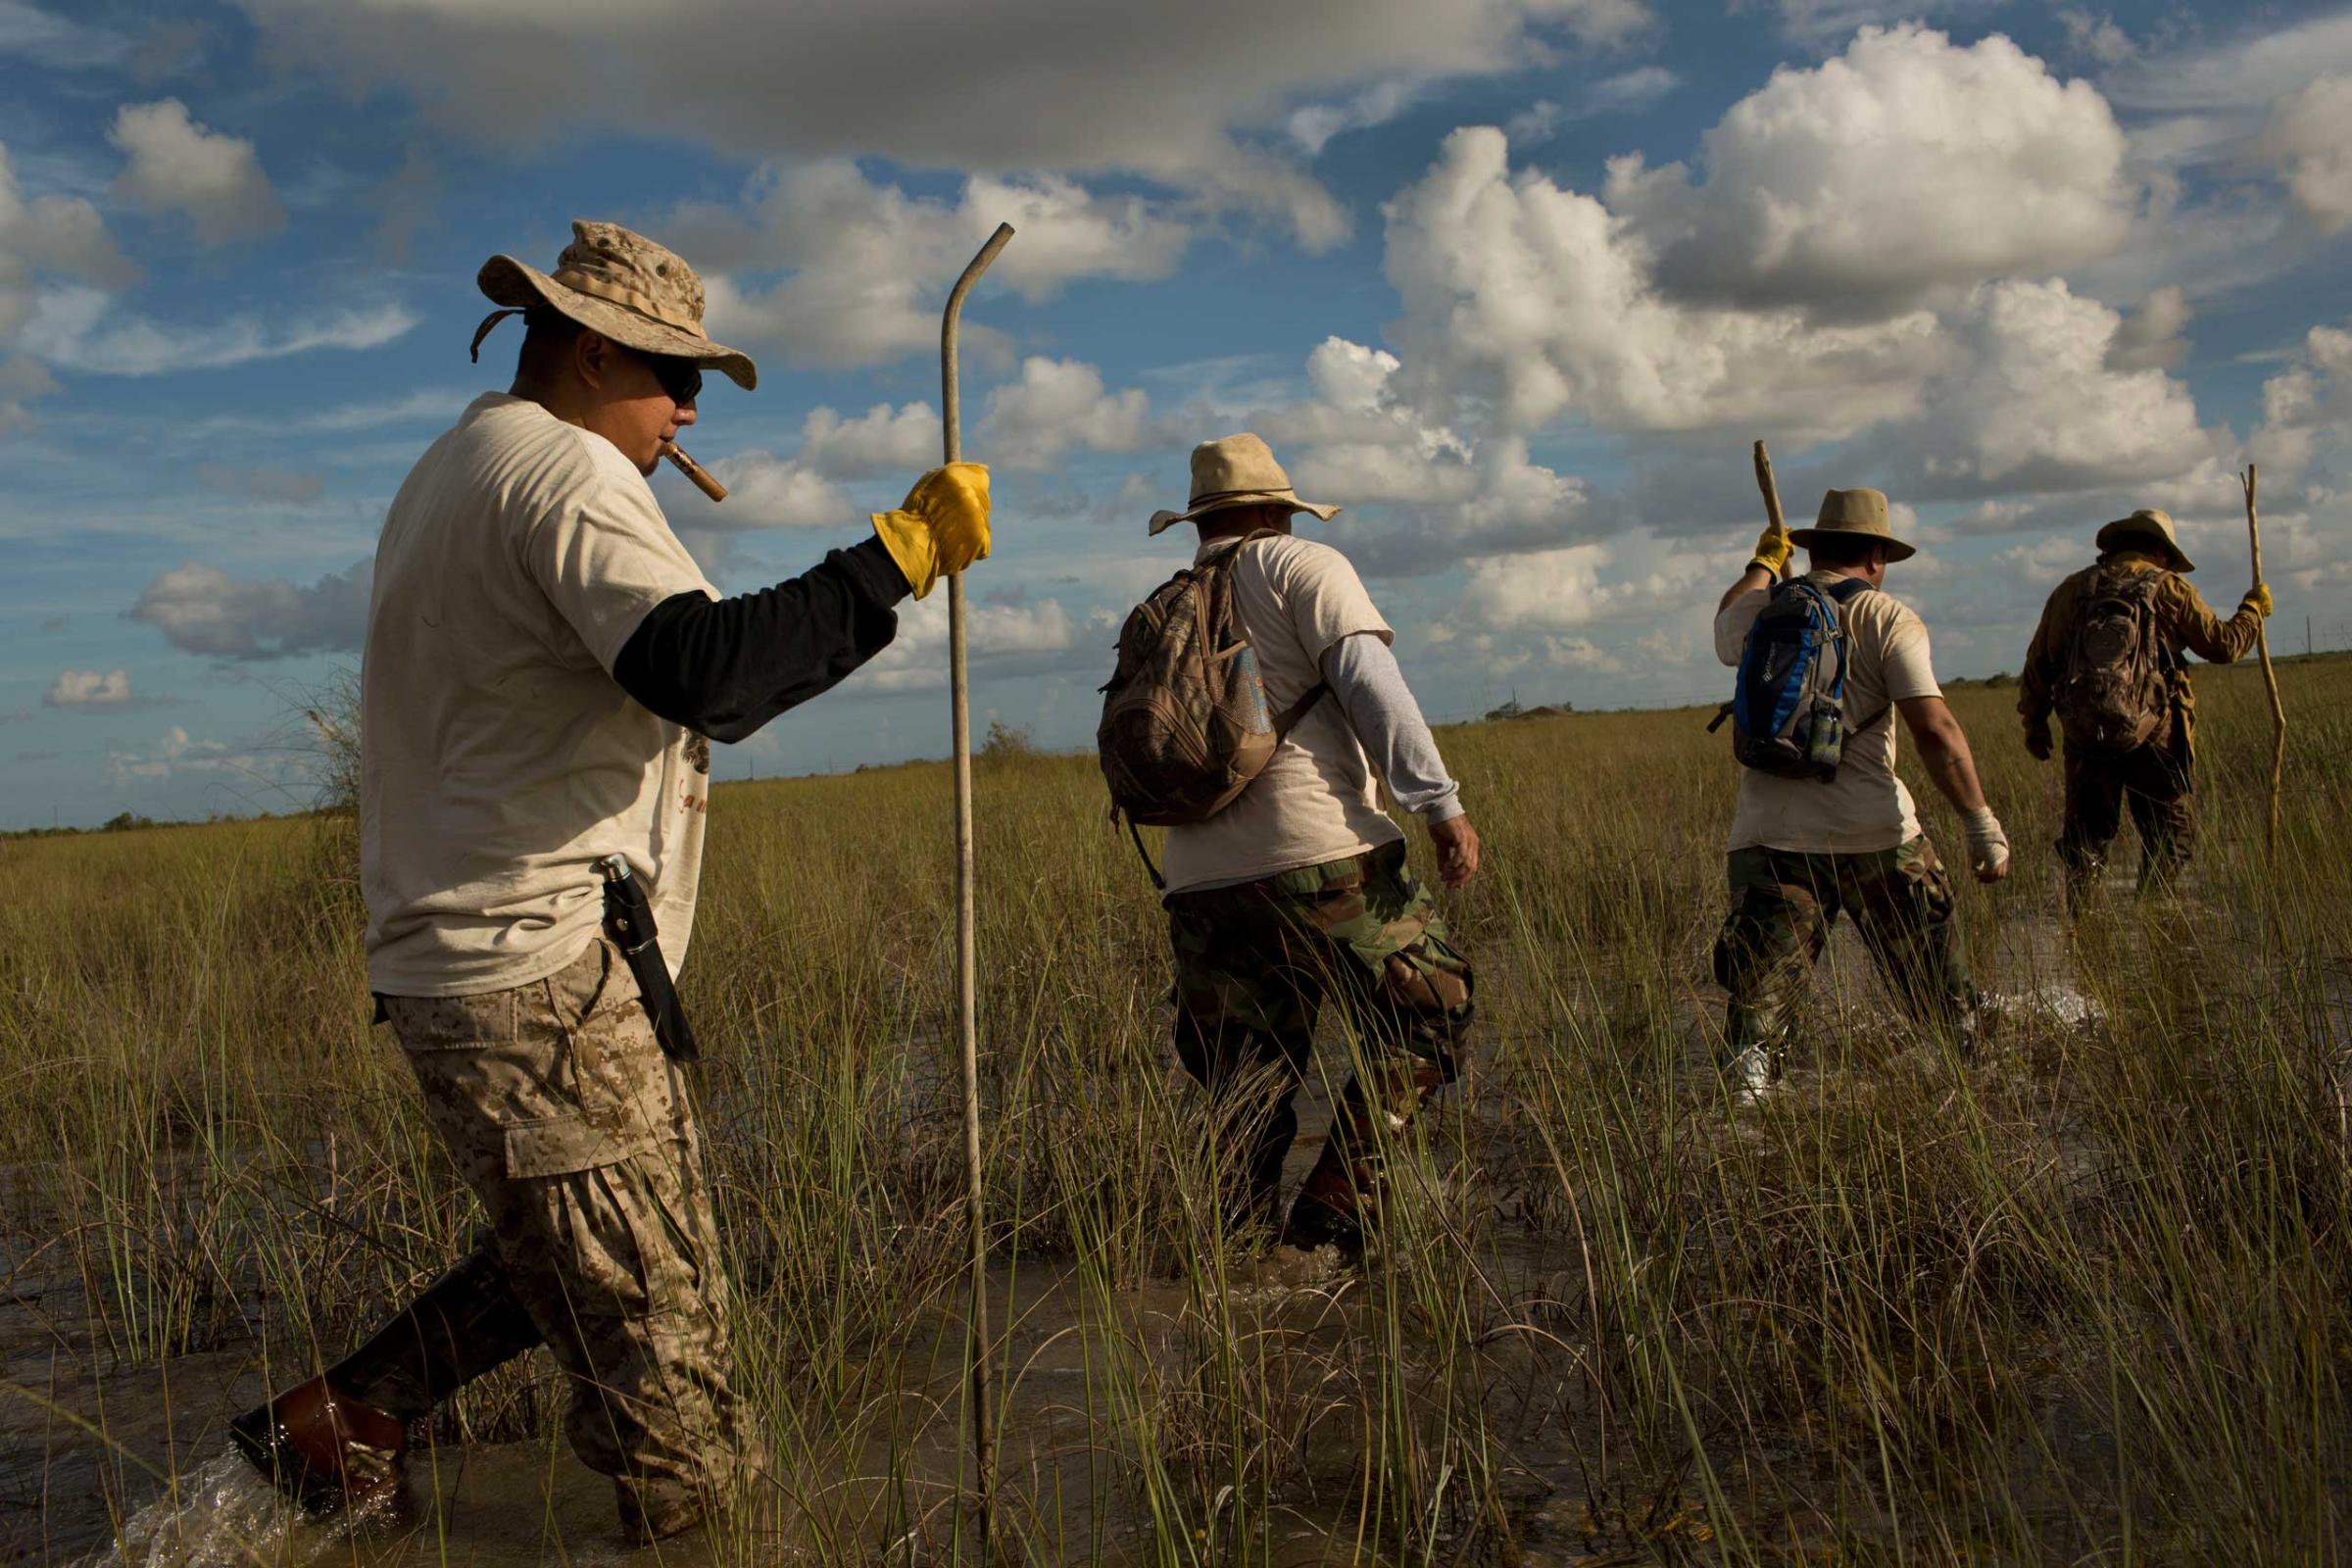 Volunteer members of the "Swamp Apes" patrol through Florida's Everglades National Park searching for invasive pythons in the Chekika area of the park on Saturday Oct. 4, 2014. From left to right are veterans Jose Rodriguez, Jorge Martinez, Alex Nunez, and founder of the group Tom Rahill. (David Guttenfelder for TIME)